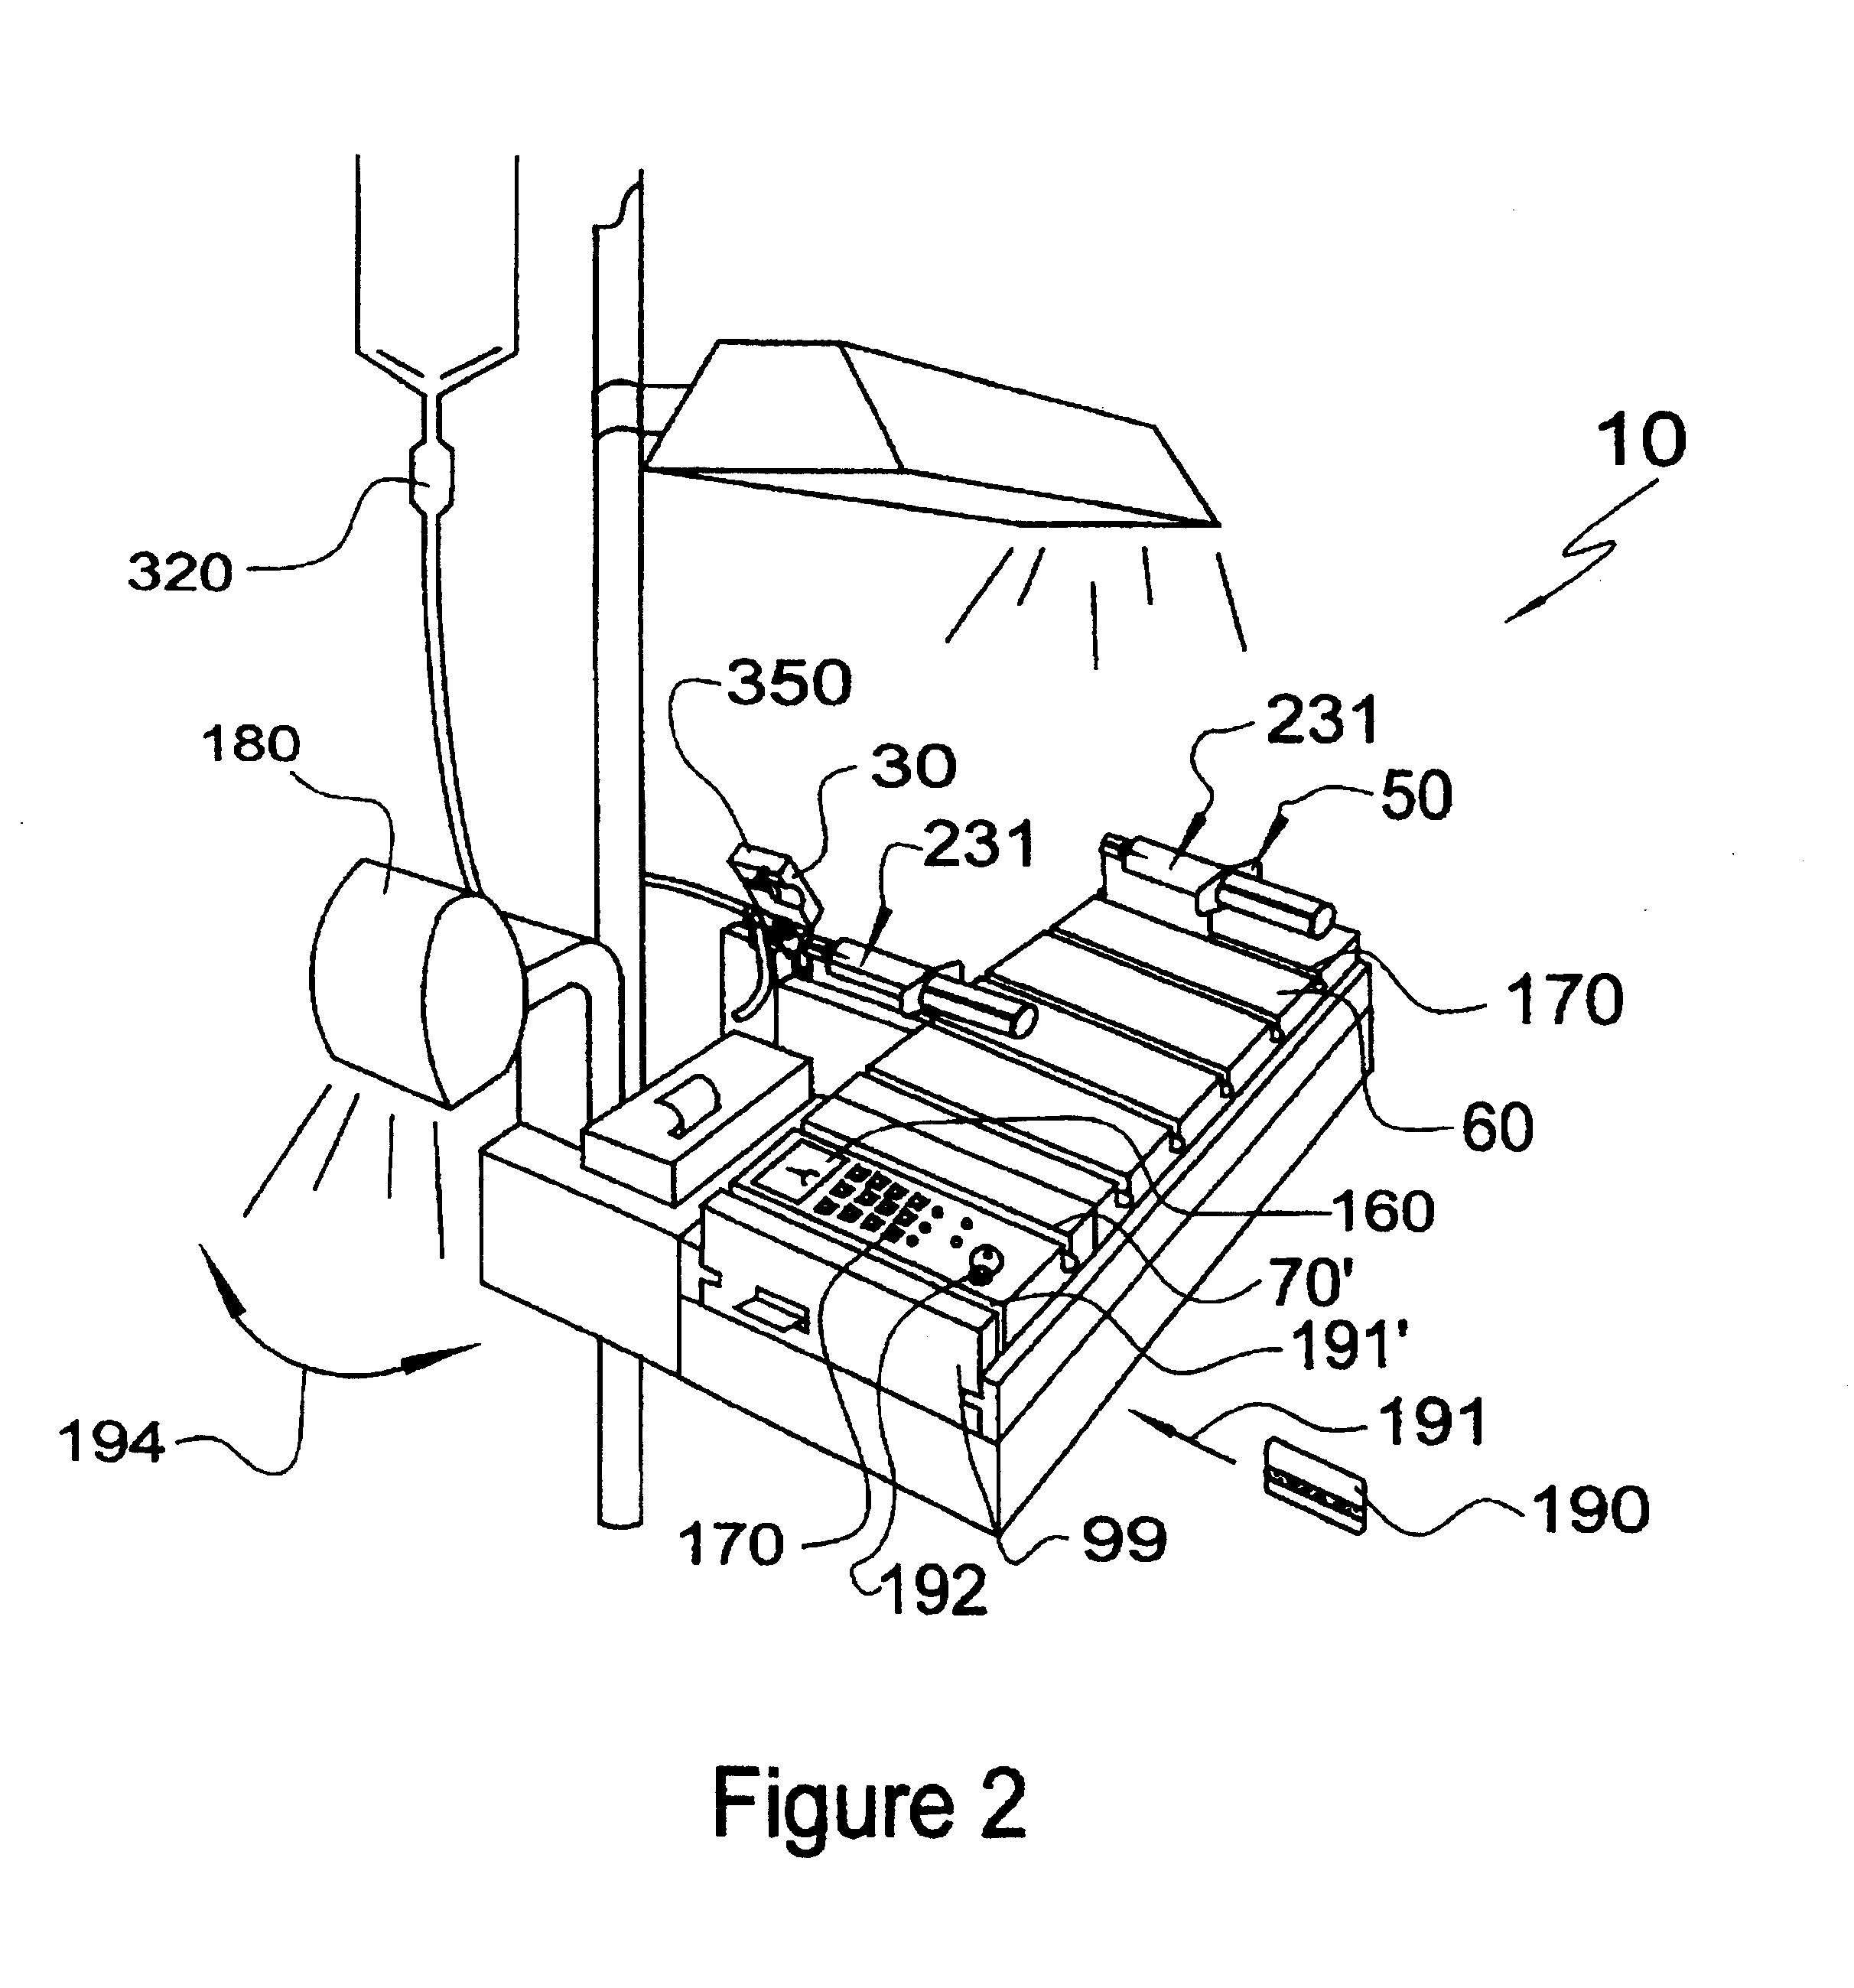 Medication delivery and monitoring system and methods